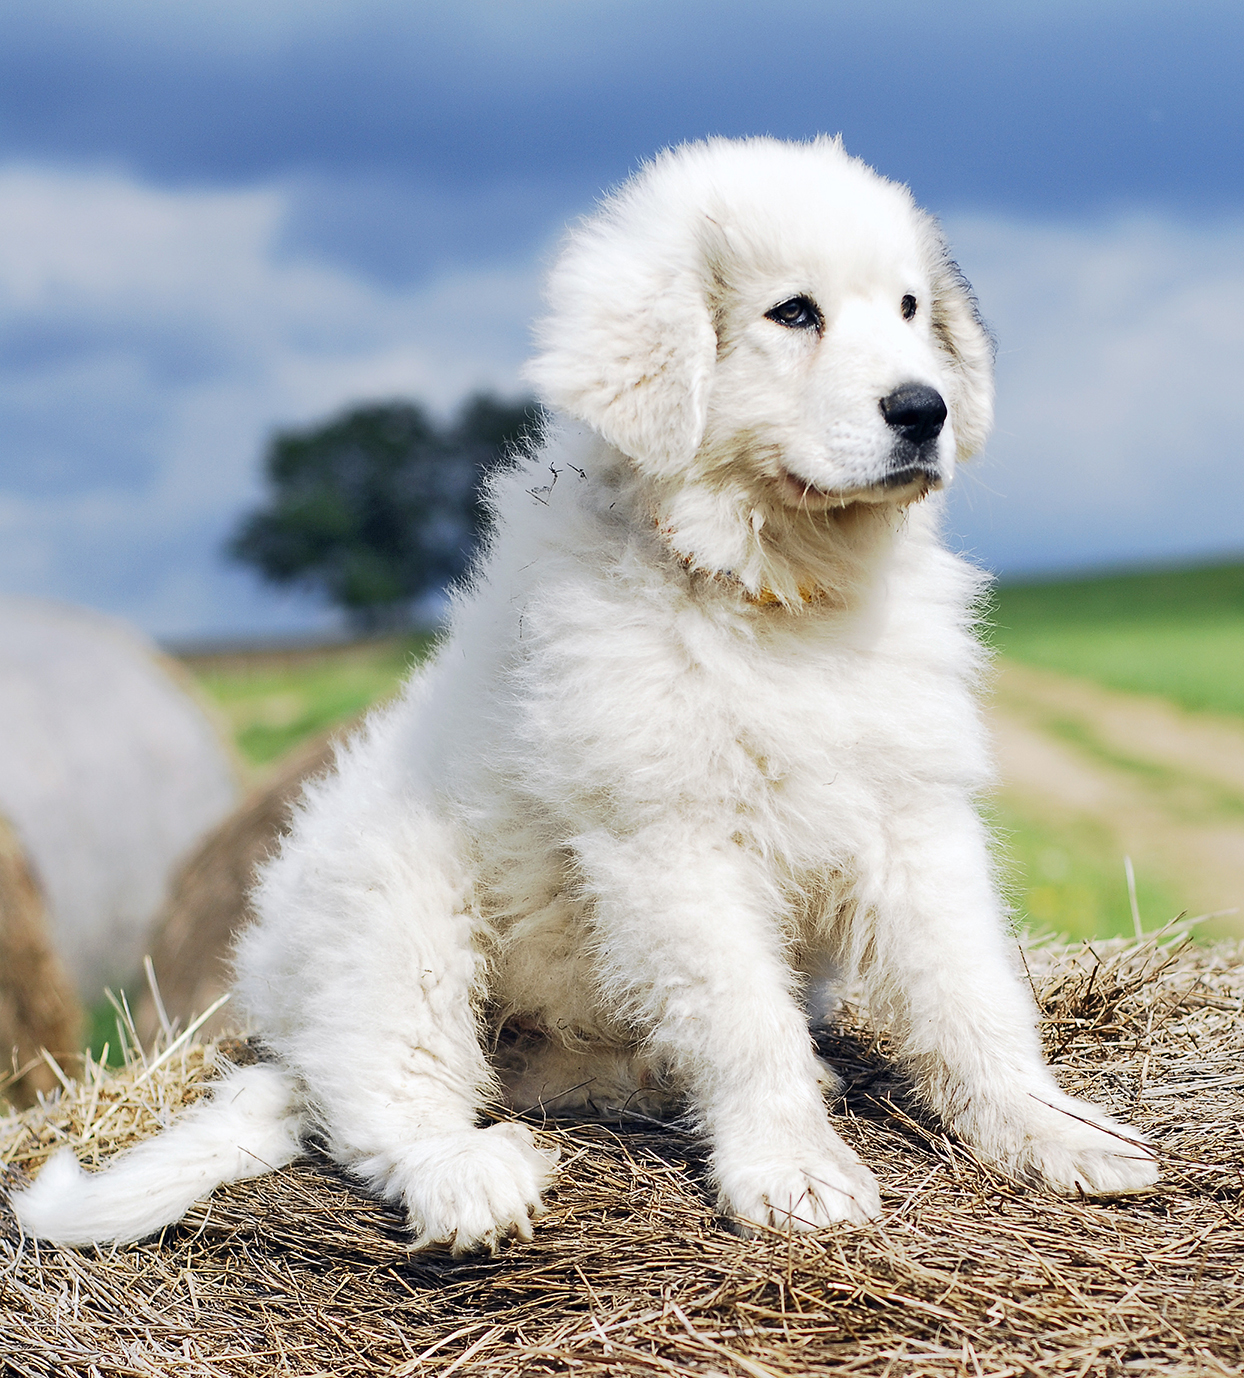 Do Great Pyrenees have a high prey drive?